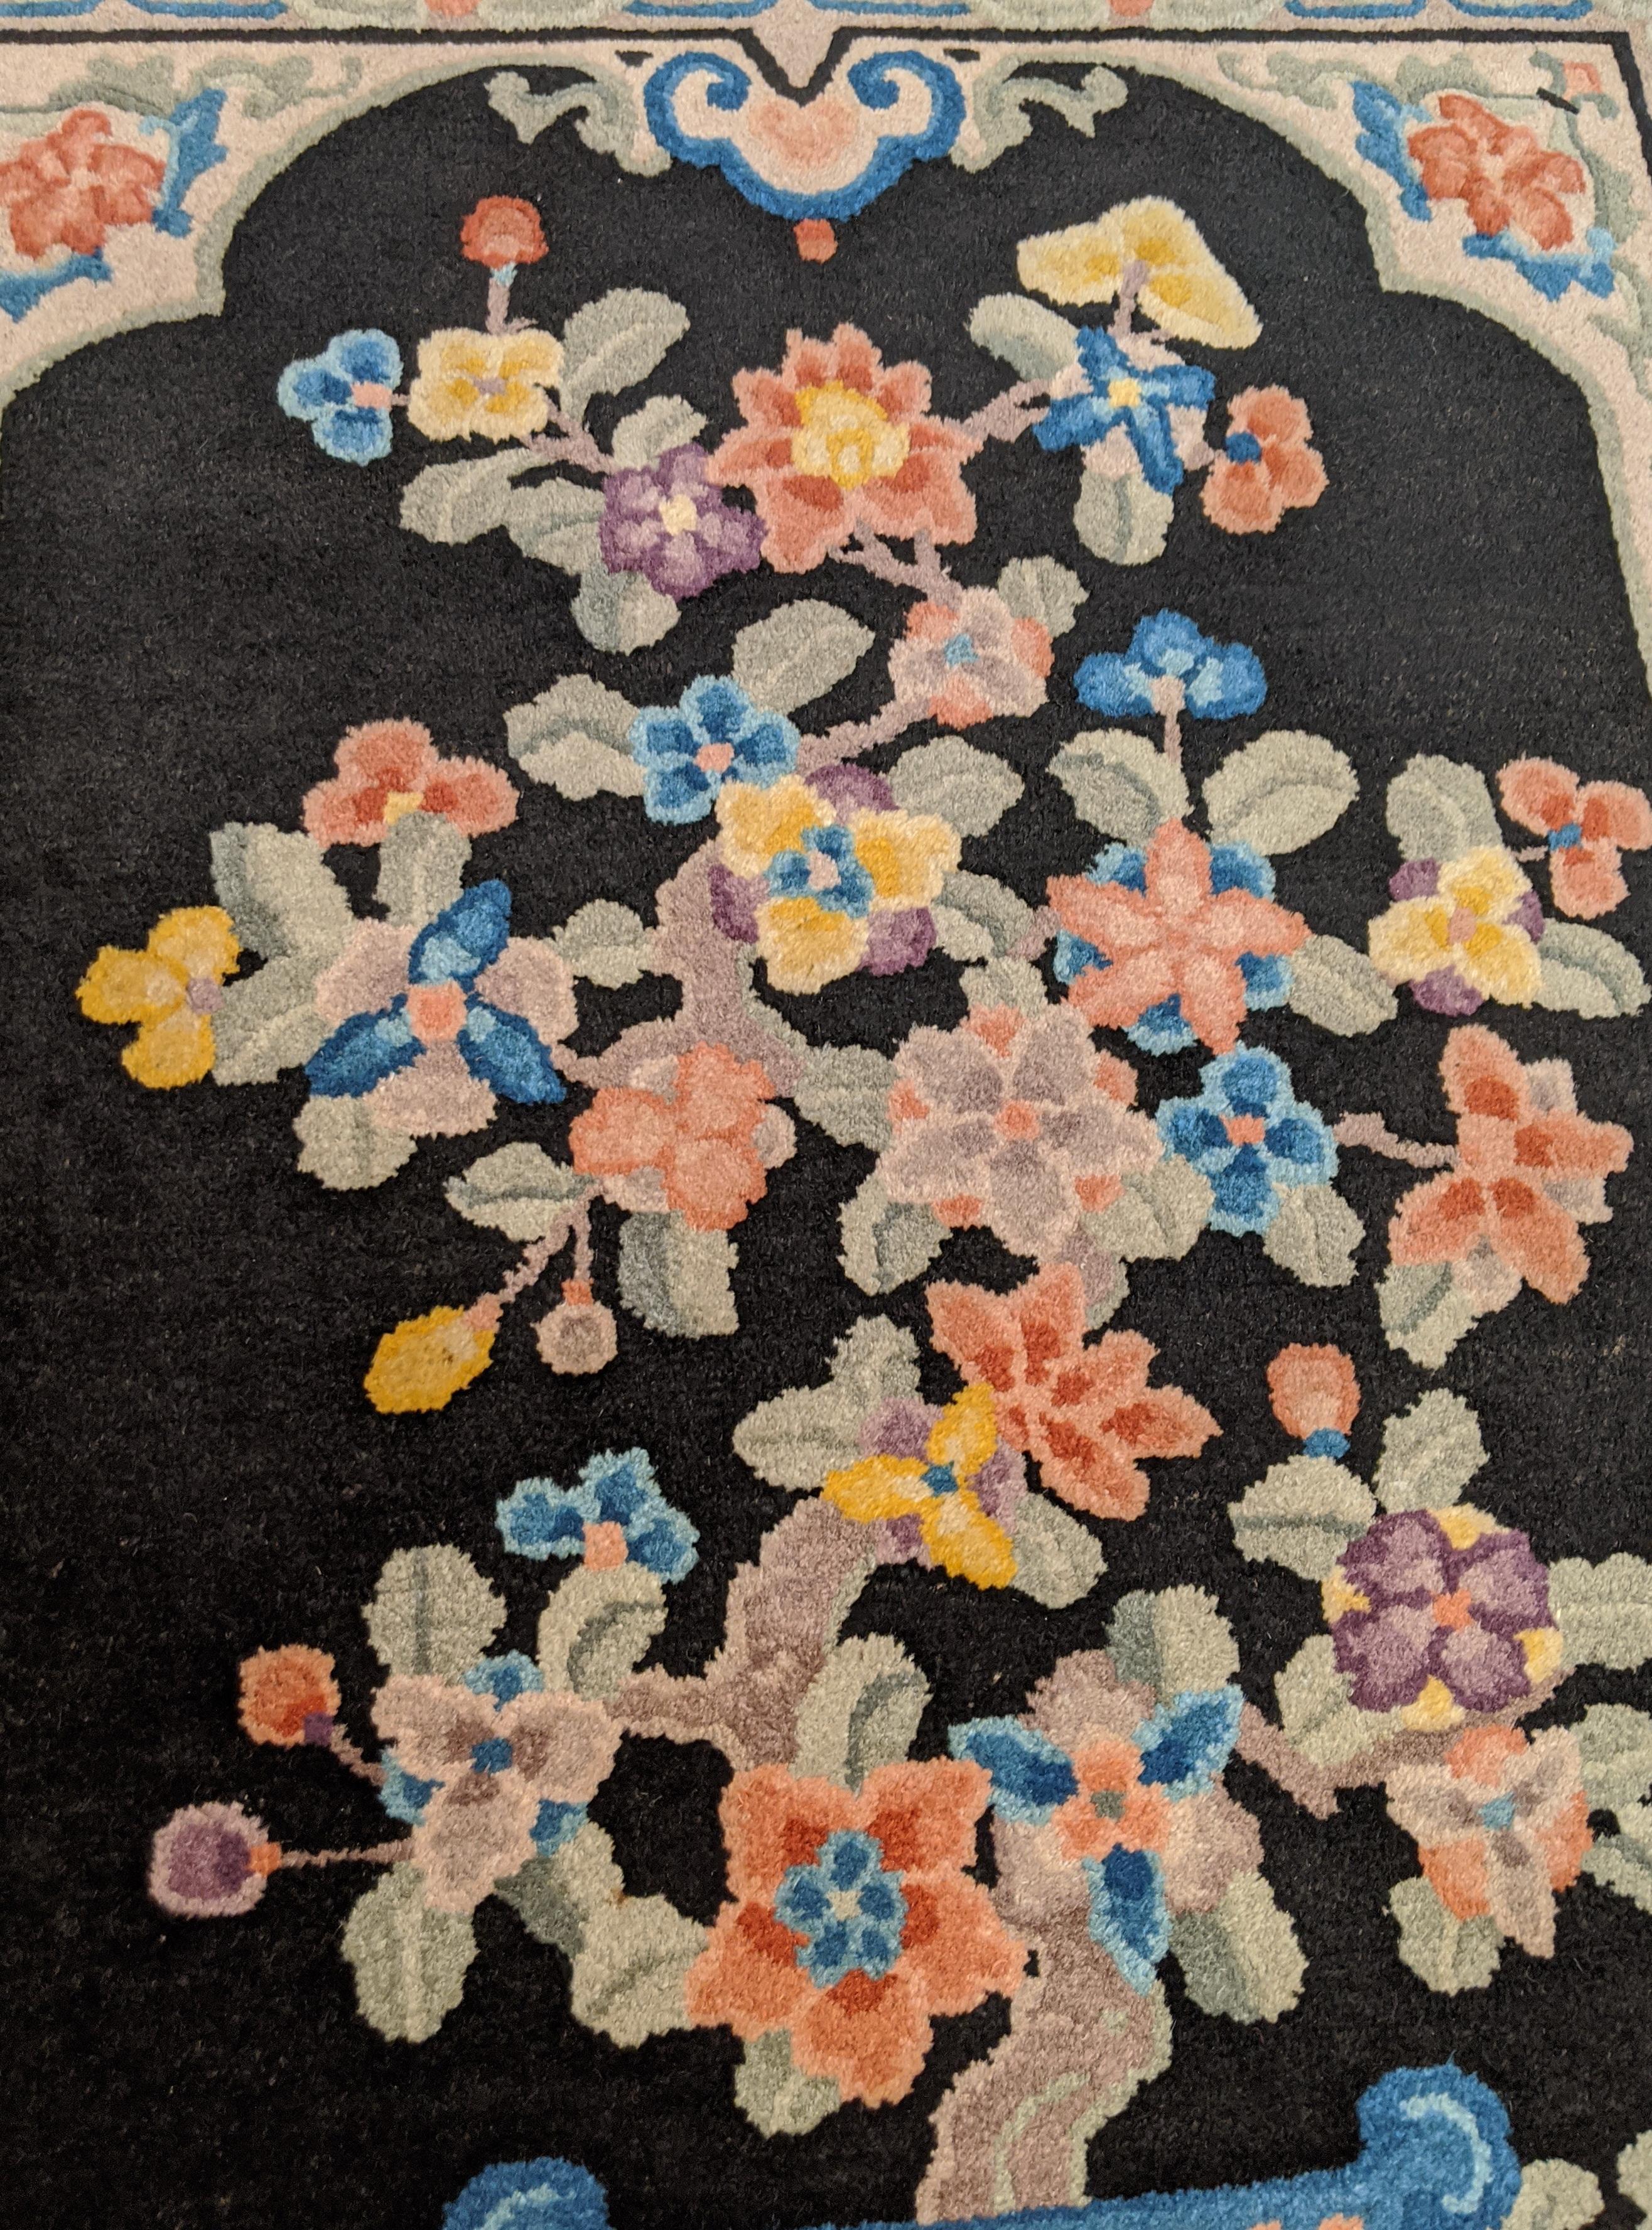 This is an antique Chinese known as a Nichols after the company that produced them in the early 20th century. These rugs are noted for their soft silky like wool and their traditional oriental motif. The black field is covered with a beautiful vase